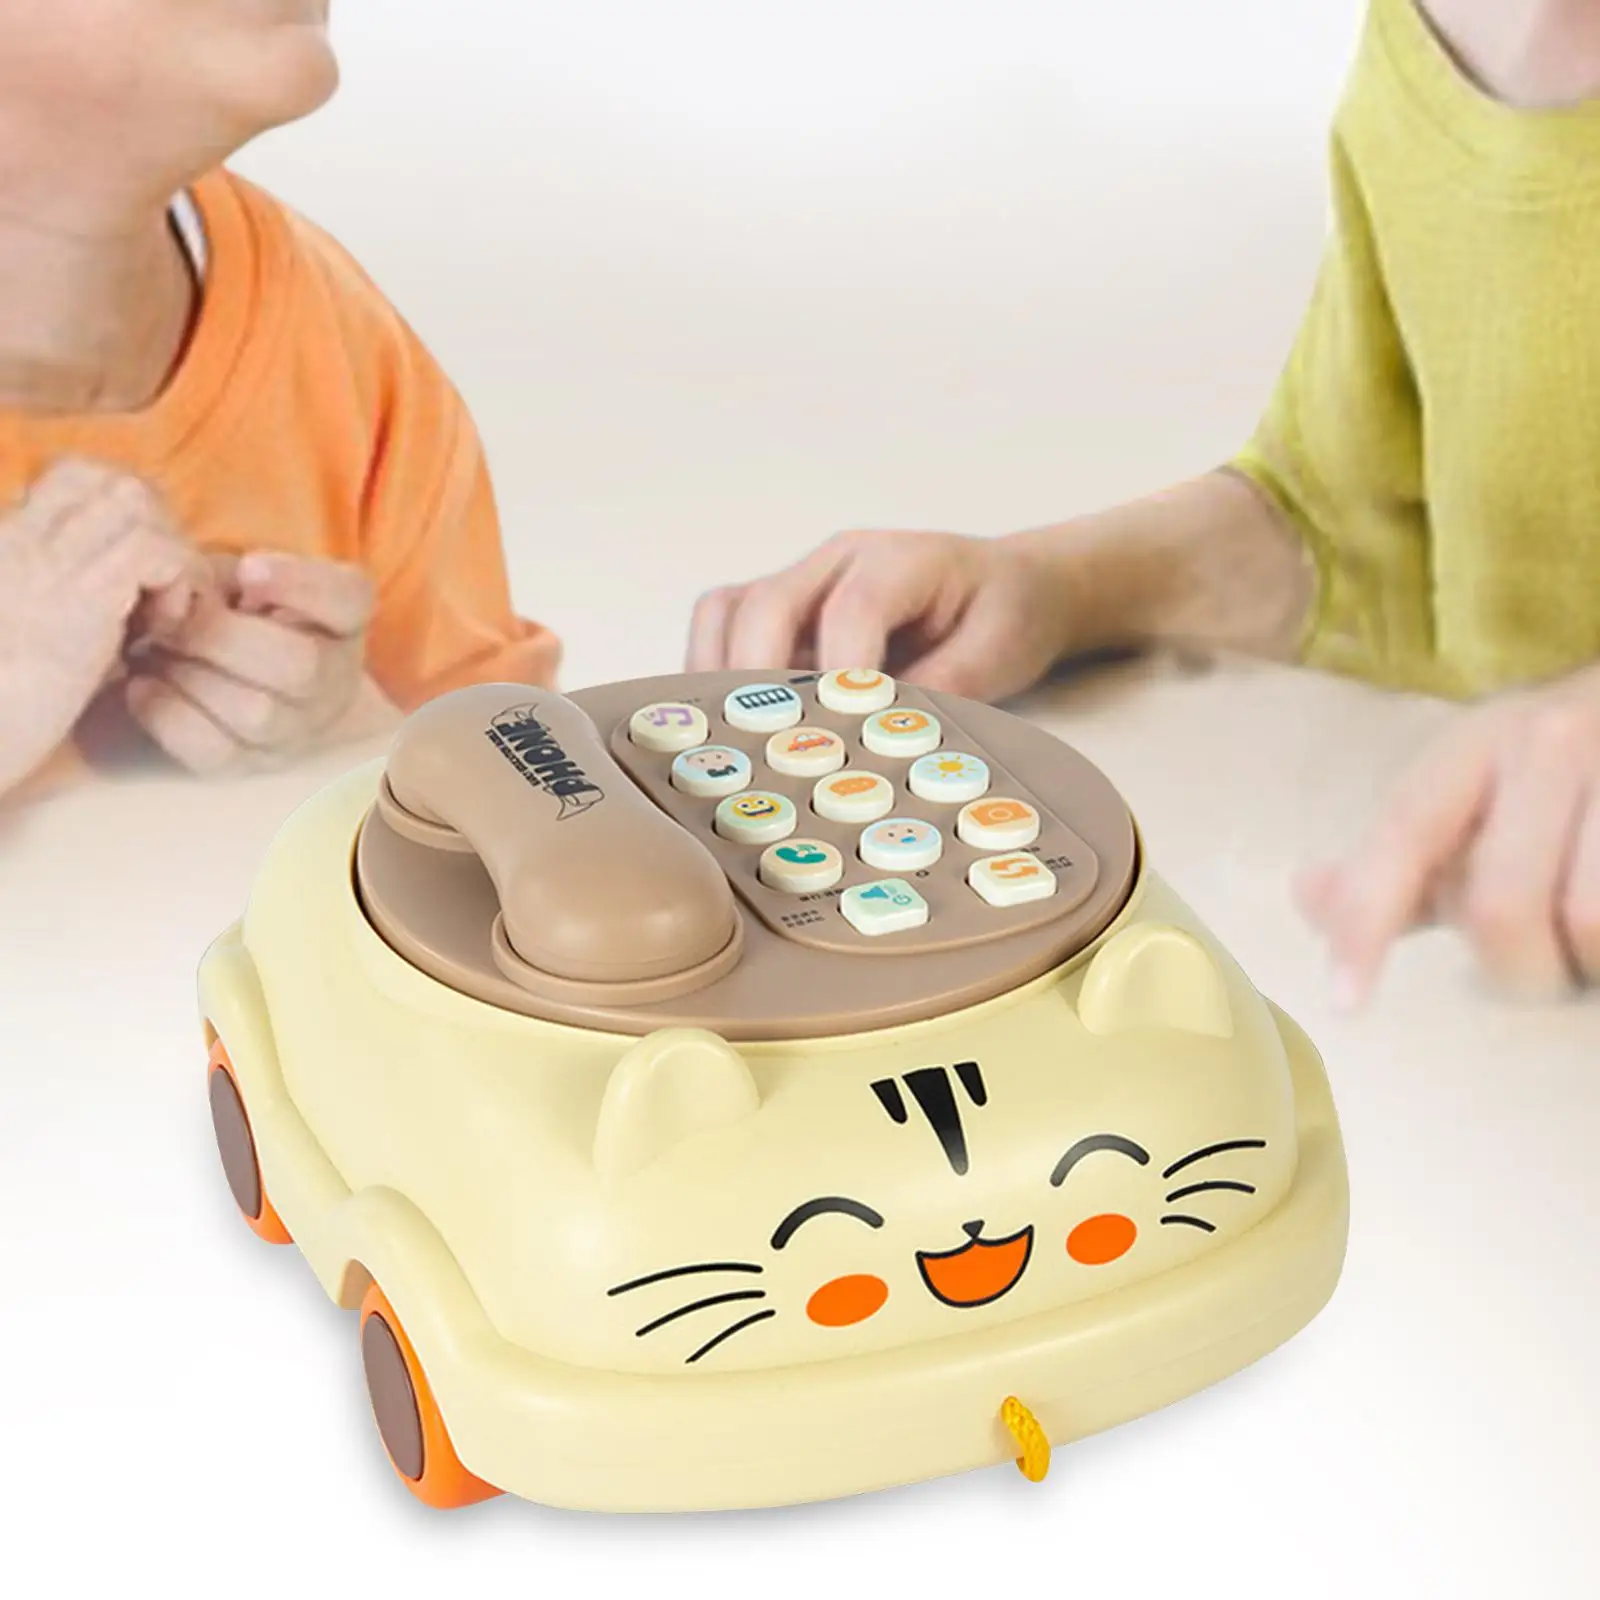 Early Learning Toy Cognitive Development Games Sensory Toy Phone for Early Education Gift Creative Gift 3 Years Old Girl